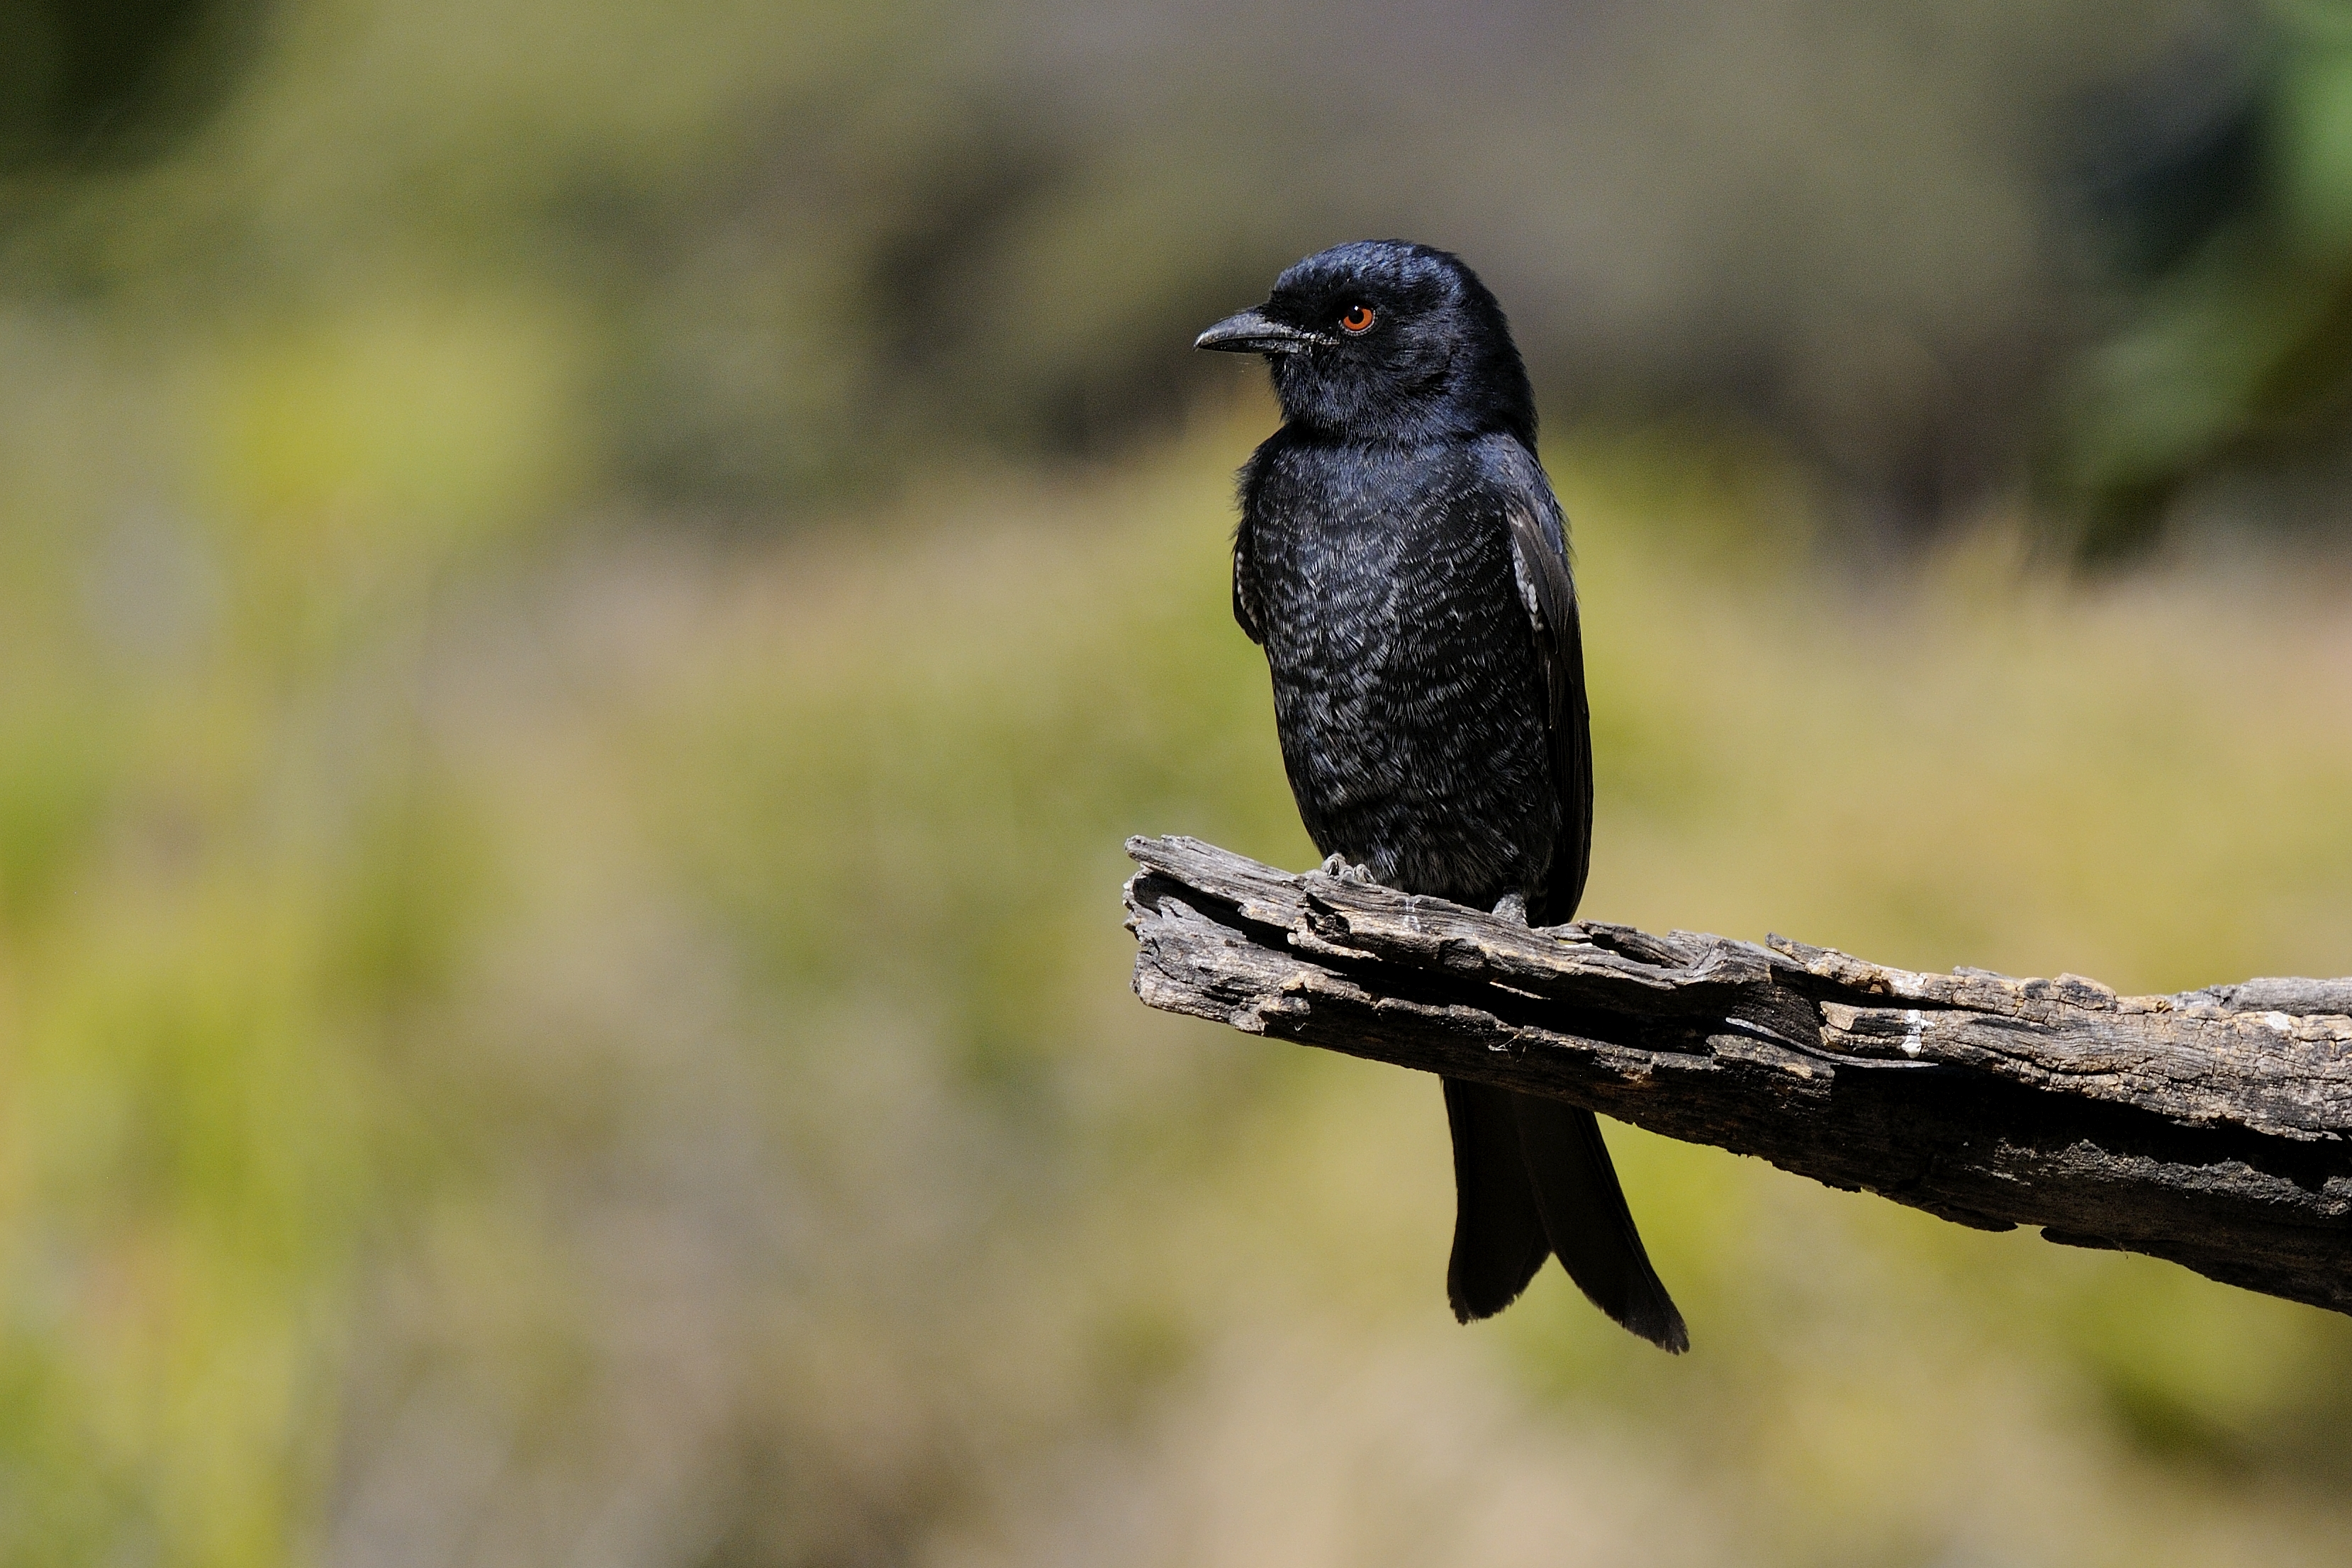 Above is the fork-tailed drongo, or Dicrurus adsimilis